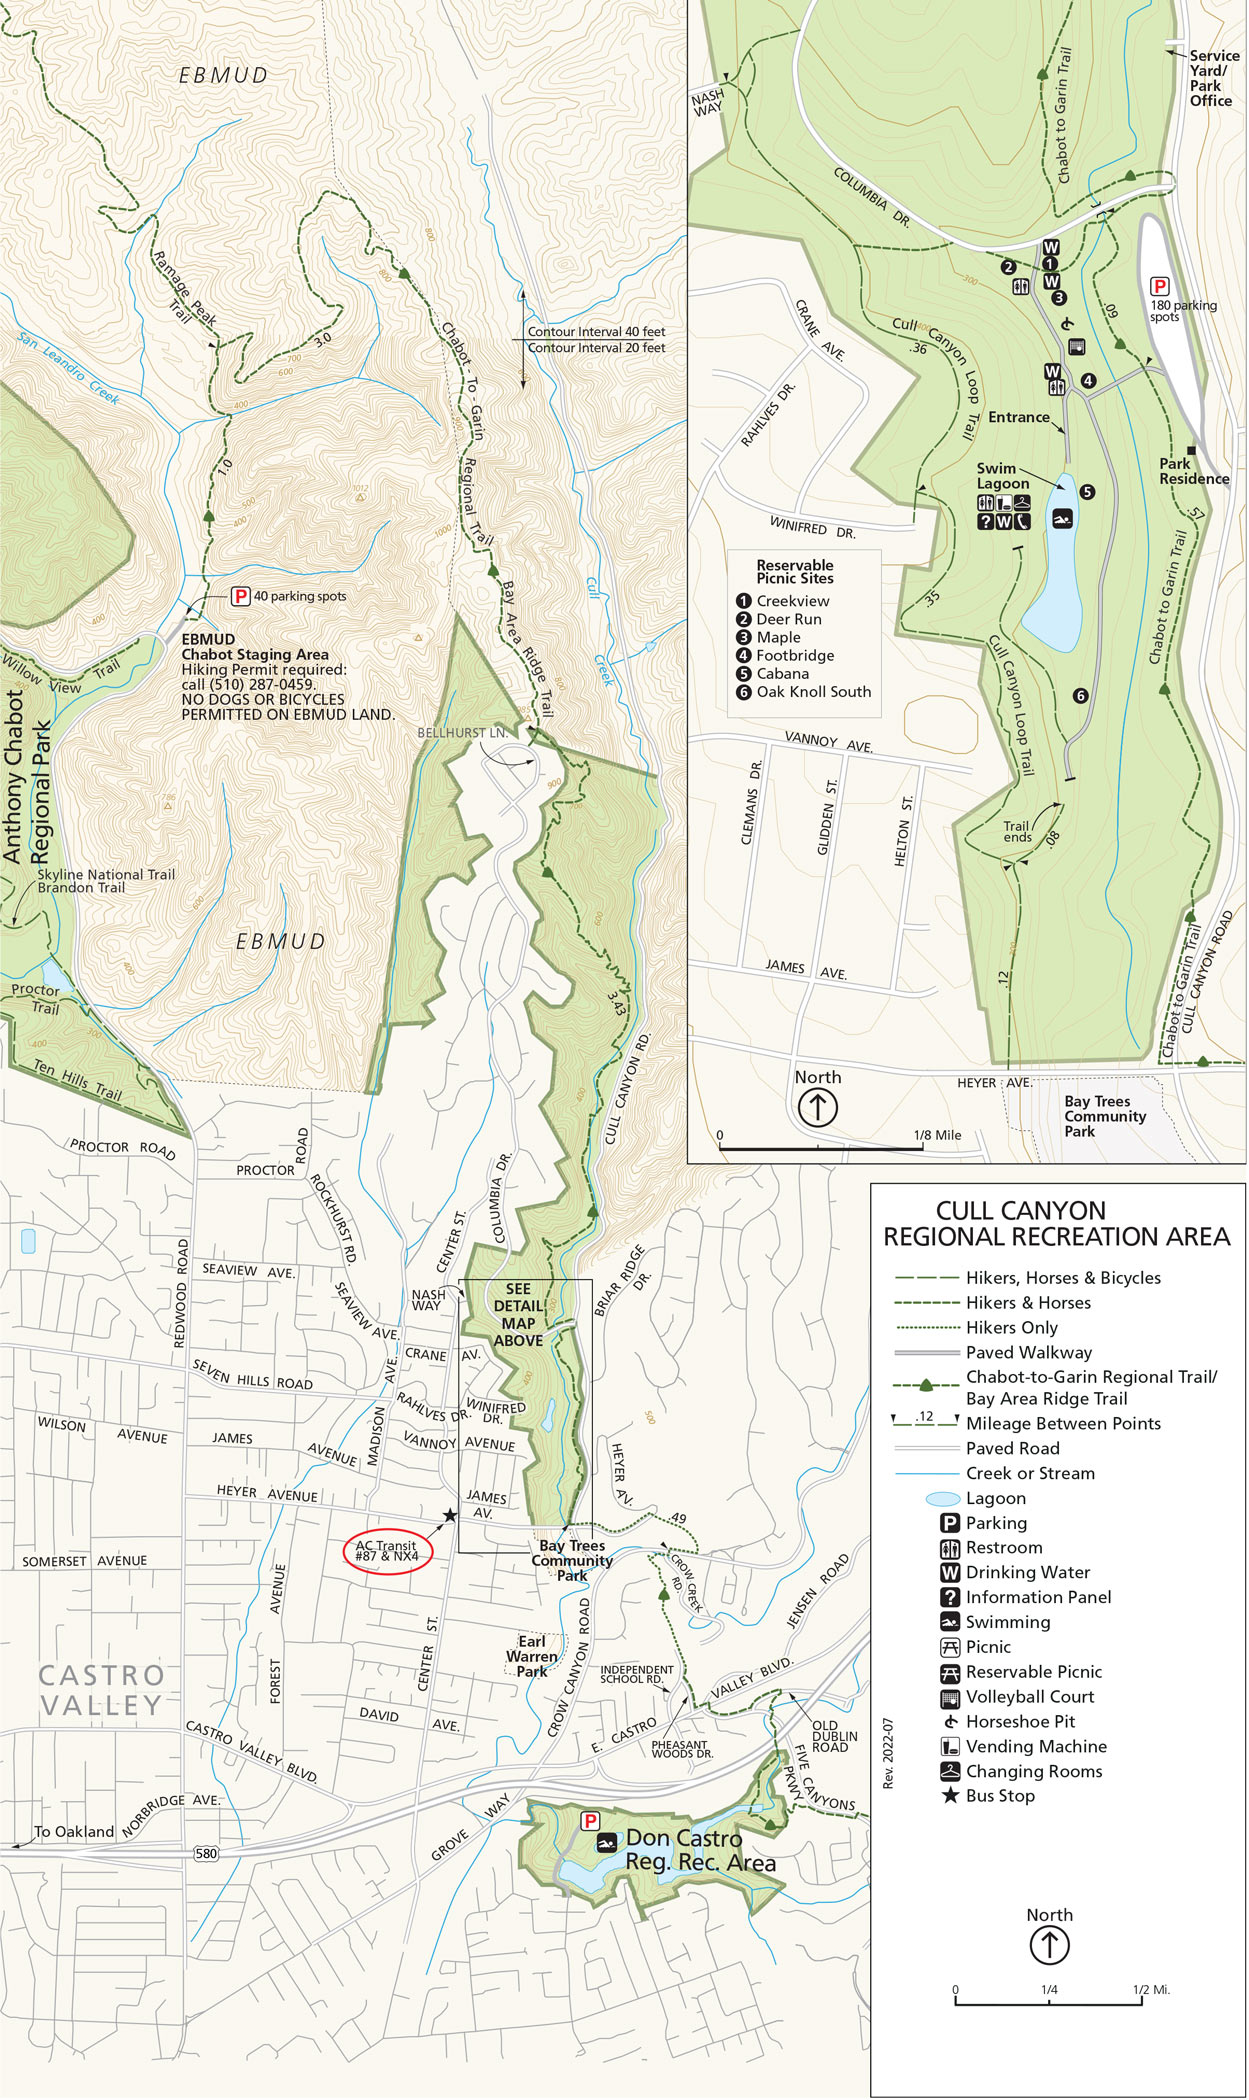 Map of Cull Canyon Regional Recreation Area